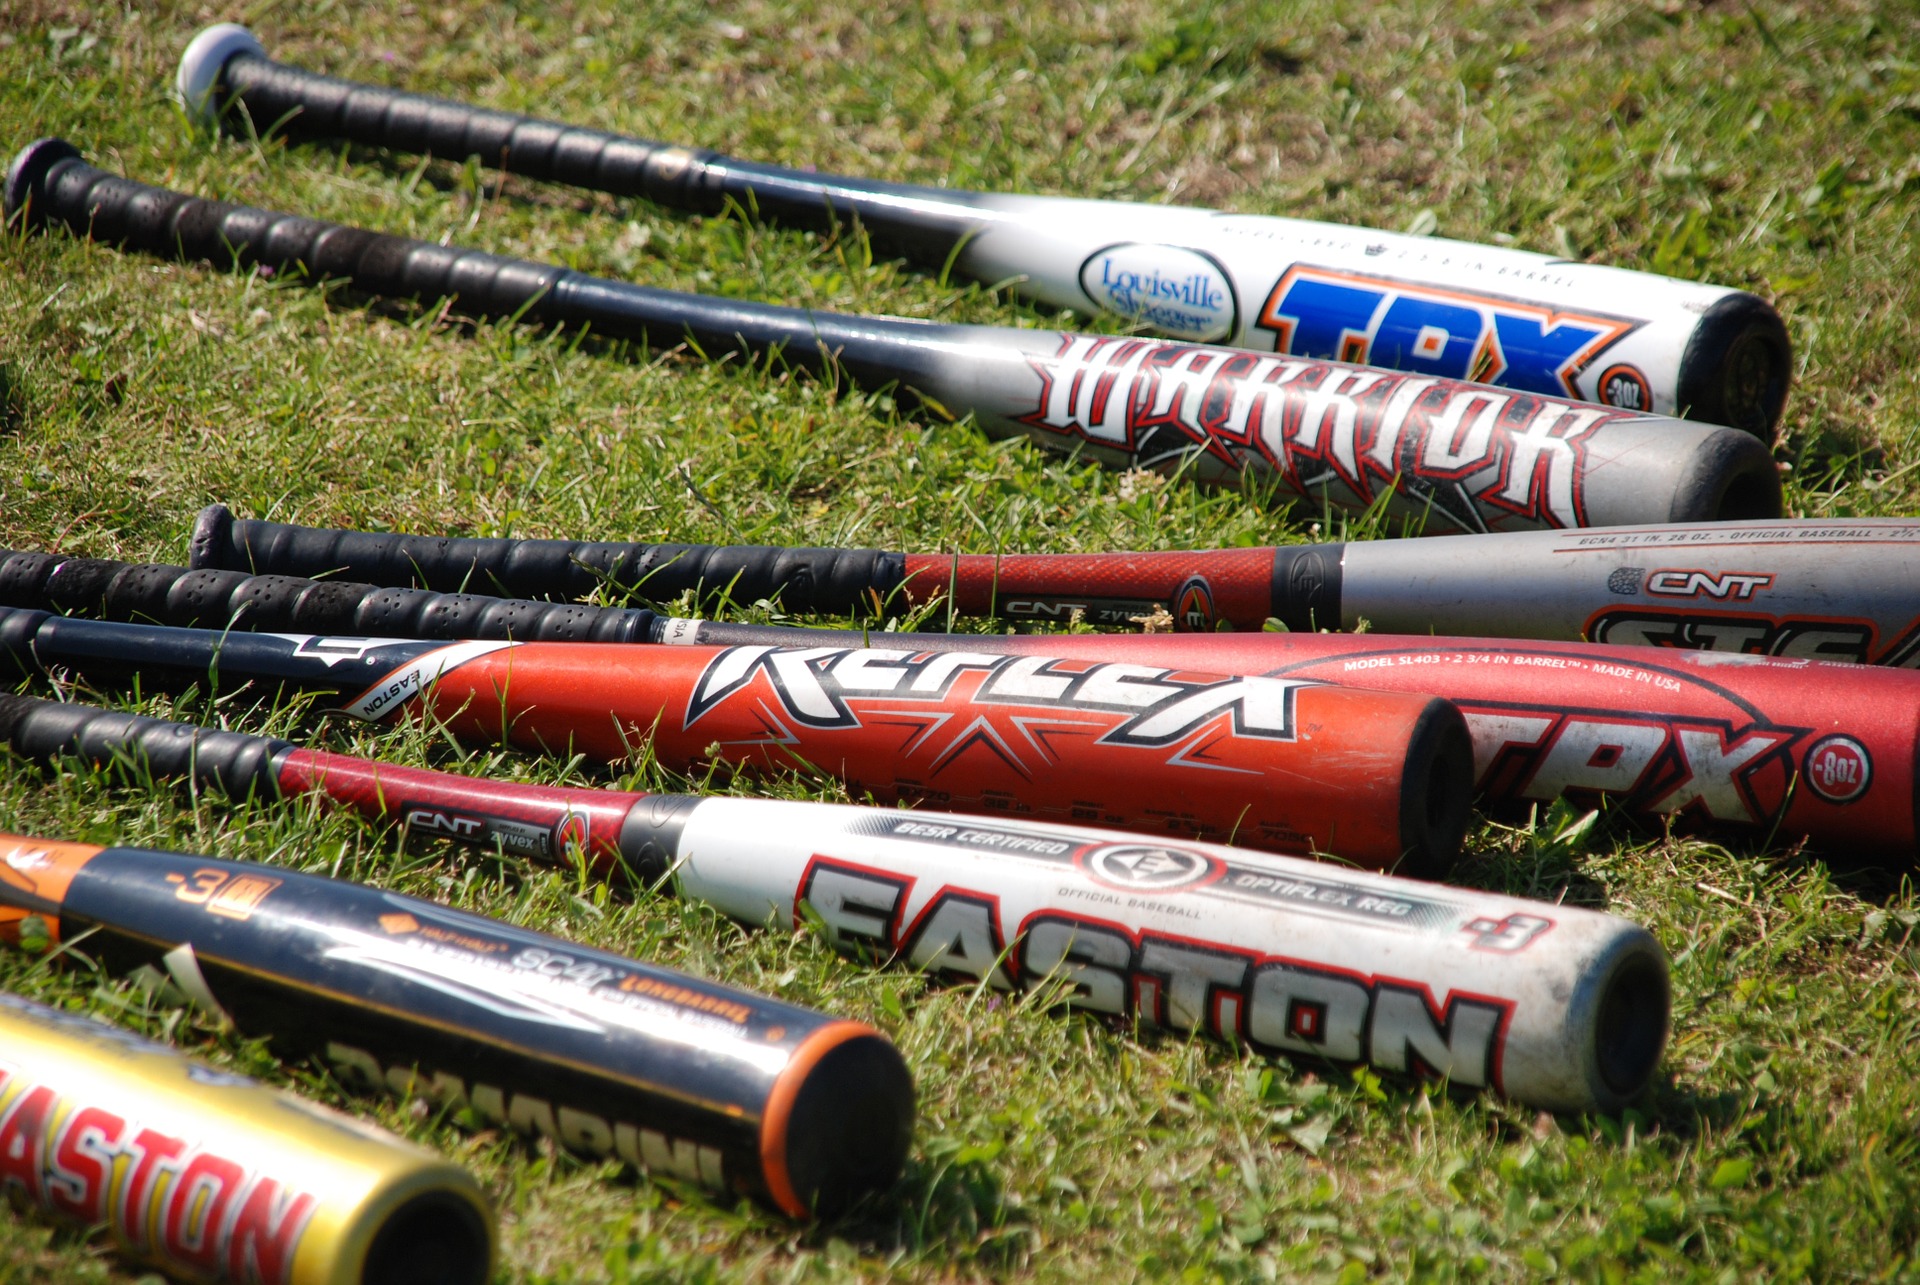 What are metal baseball bats made of?